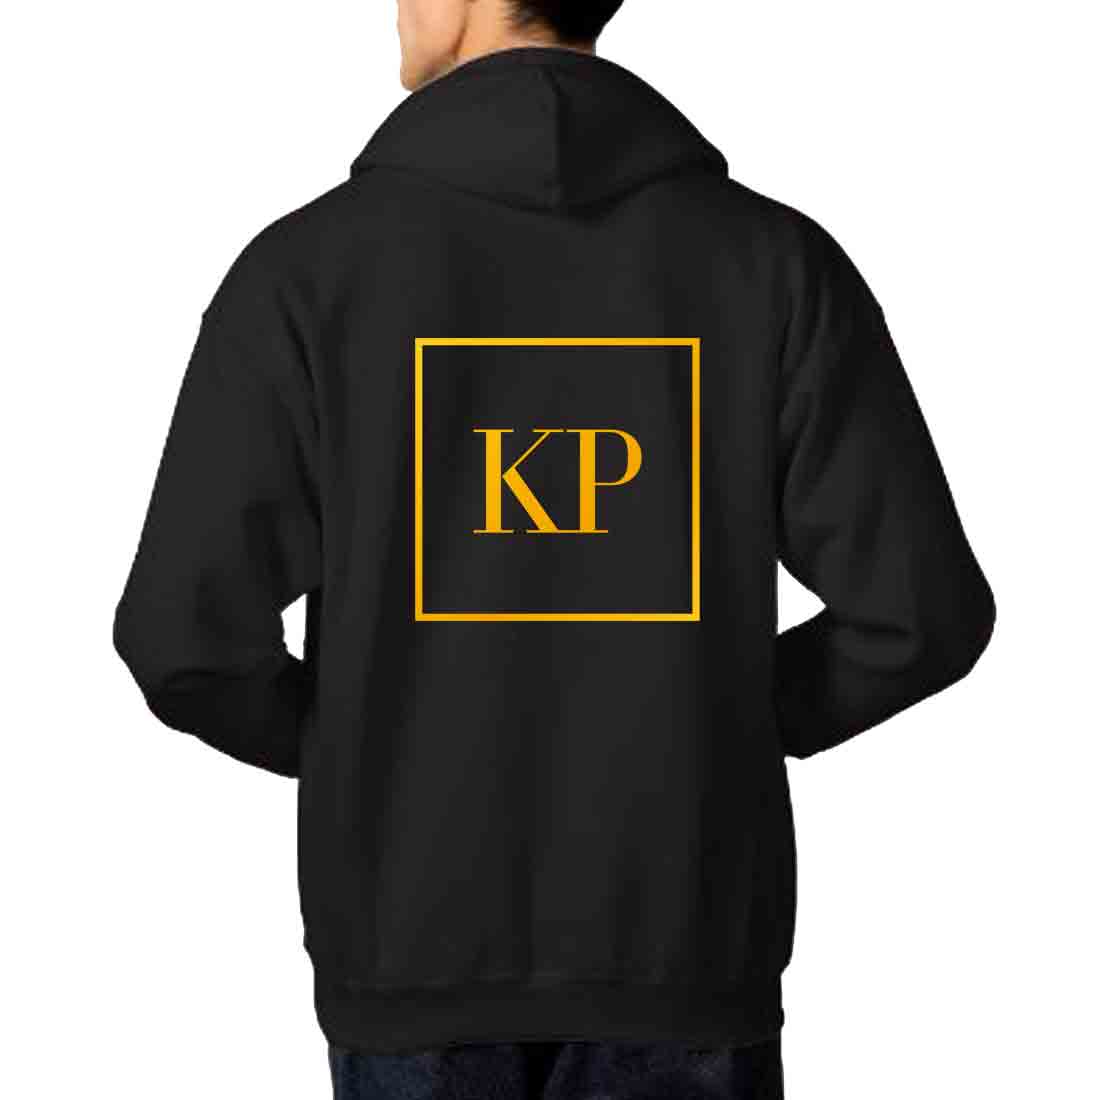 Nutcase Personalized Hoodies for Him - Add Name Box Style